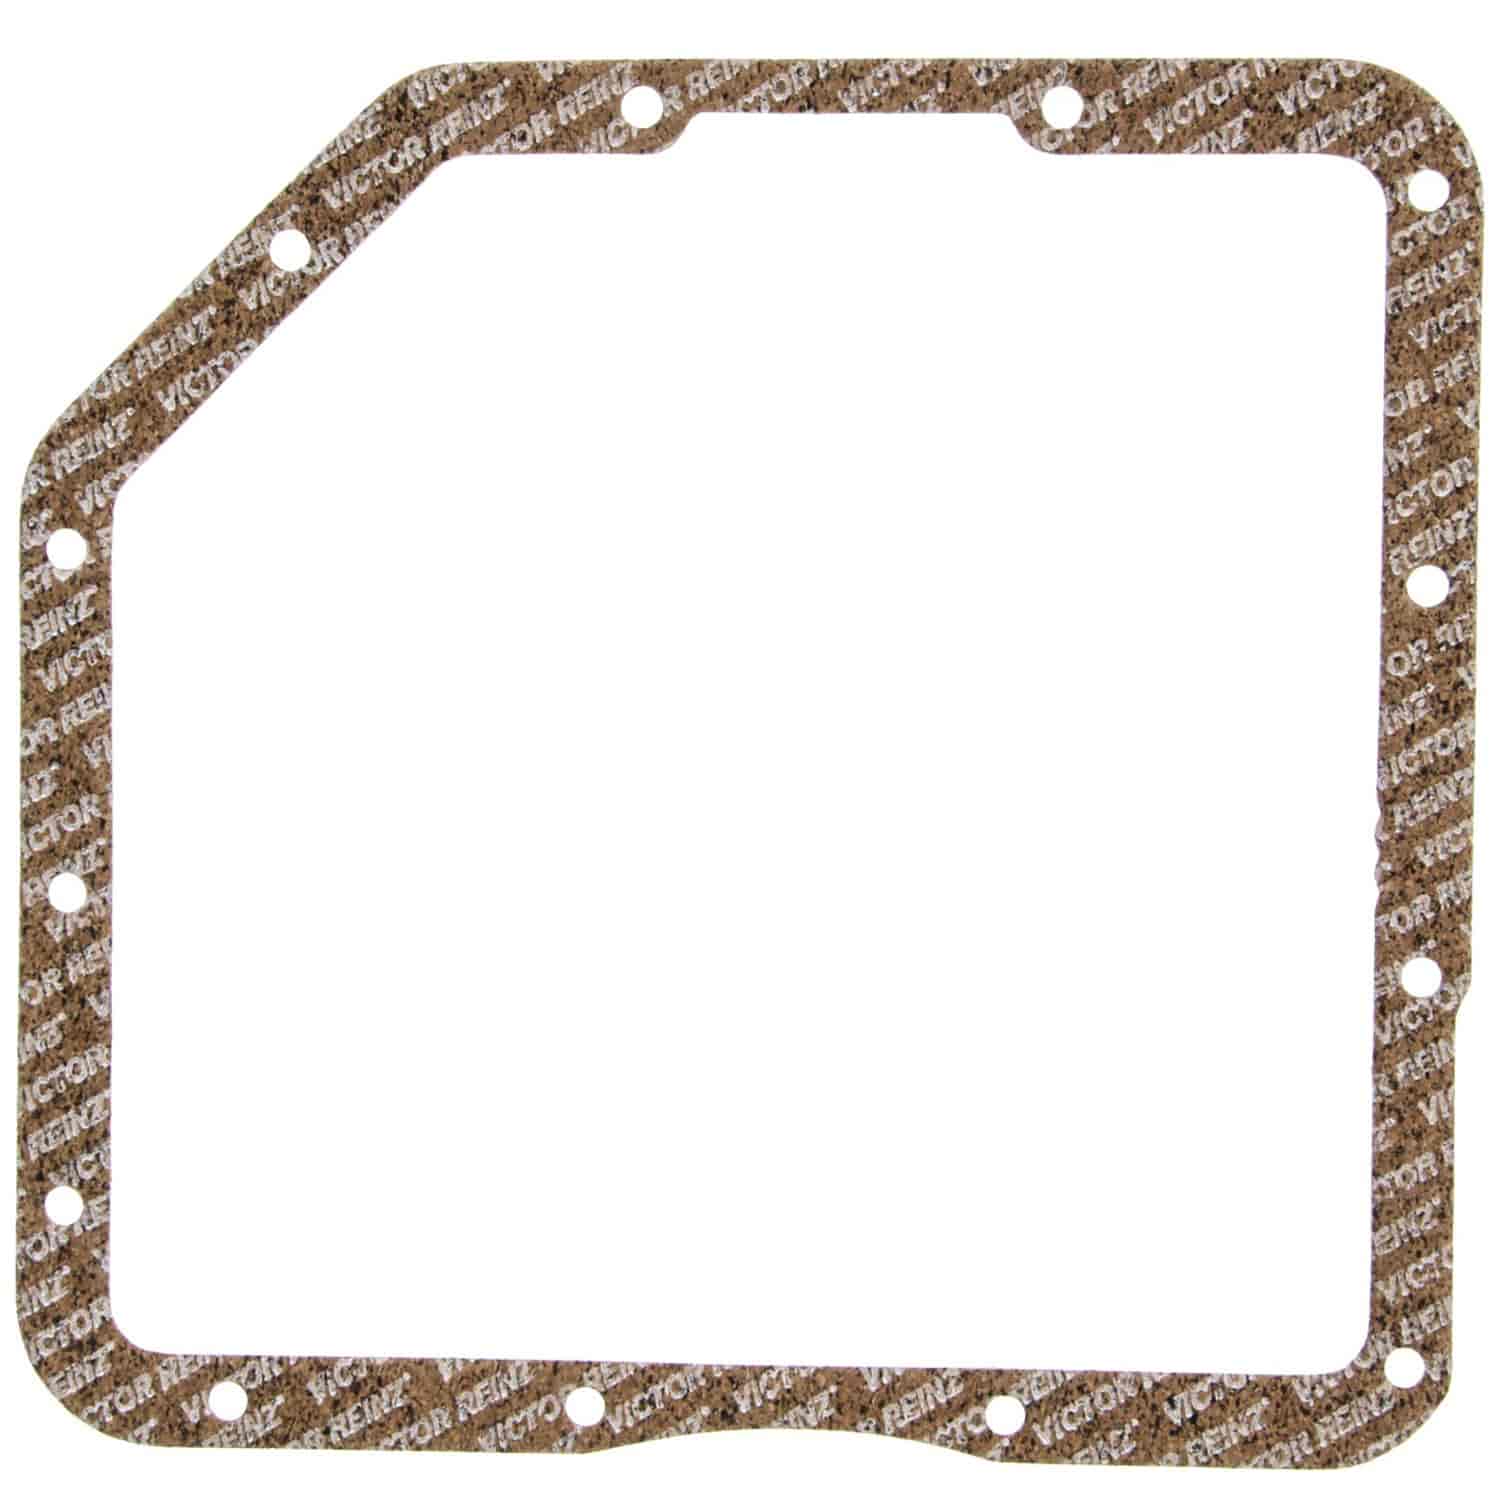 Automatic Transmission Gasket 1968-1985 GM TH250/TH350/TH375 in Cork with Metal Carrier